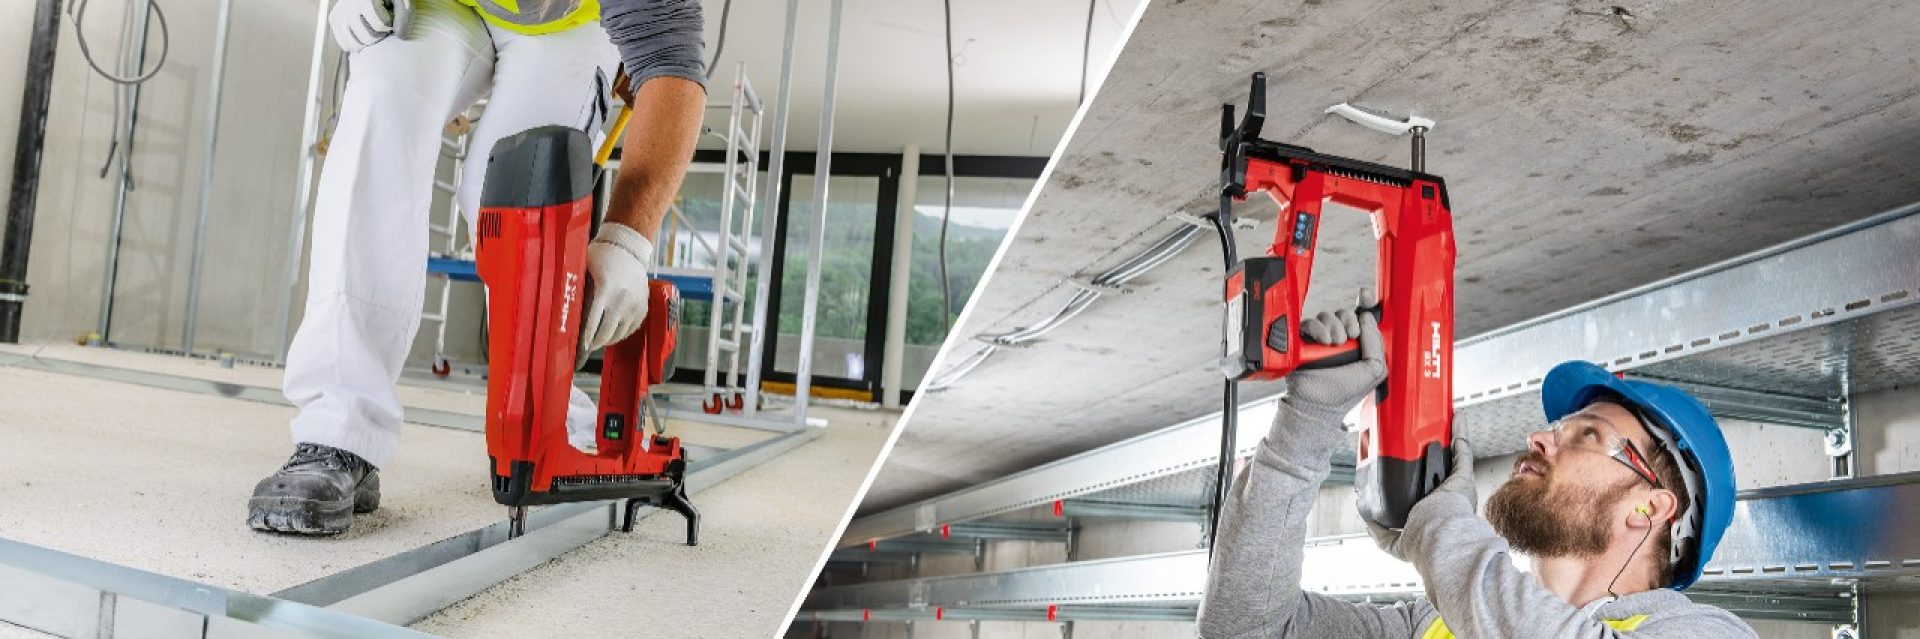 Make the switch to the battery-powered BX 3, the cordless nailer designed to be cleaner, quieter and more hassle-free fastenings to concrete than any other nailer